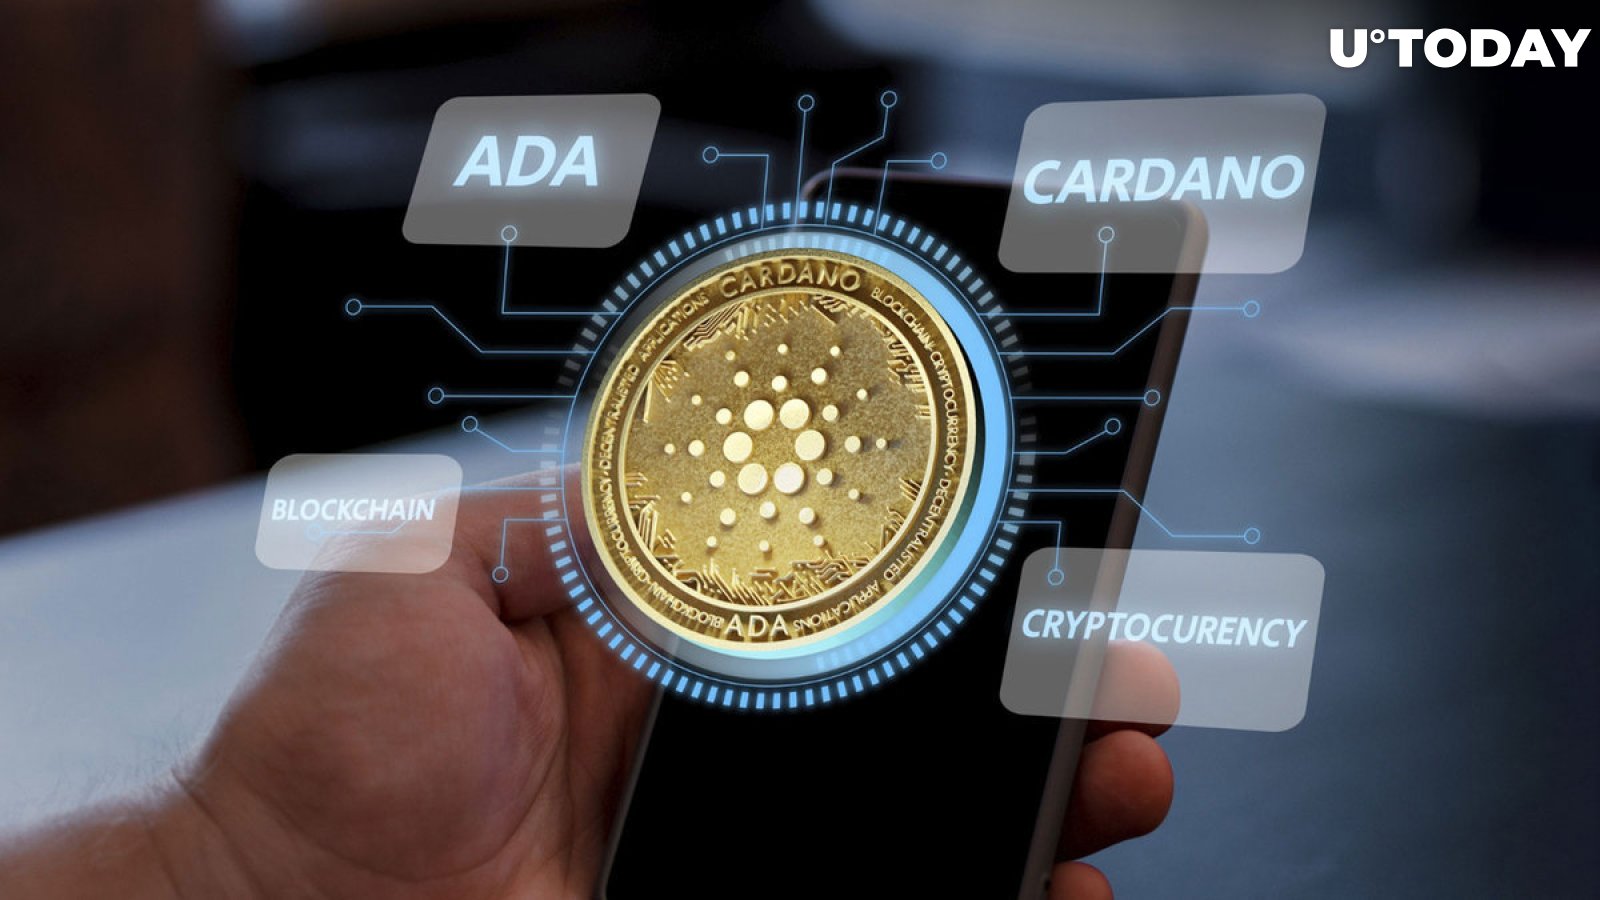 Cardano Mainnet Receives New Smart Contract Toolset Deployment: Details